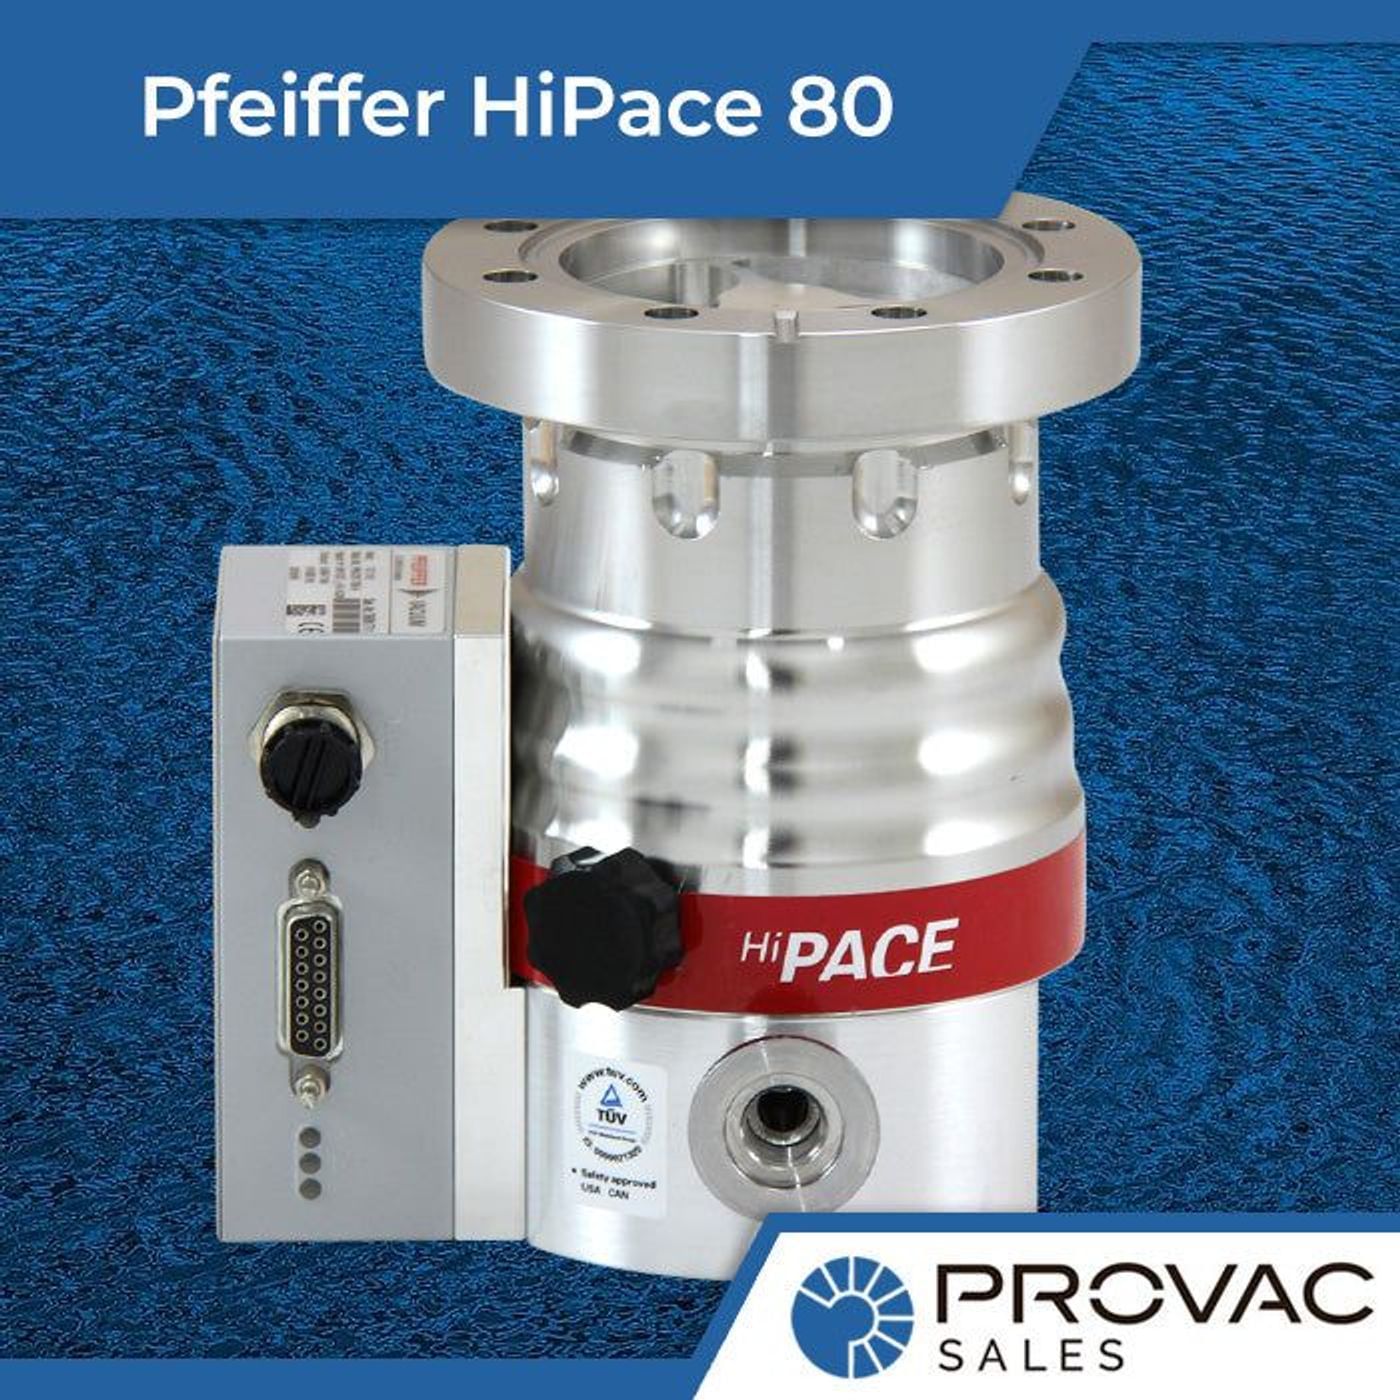 Pfeiffer HiPace 80 Turbo Pumps, In Stock Ready To Ship